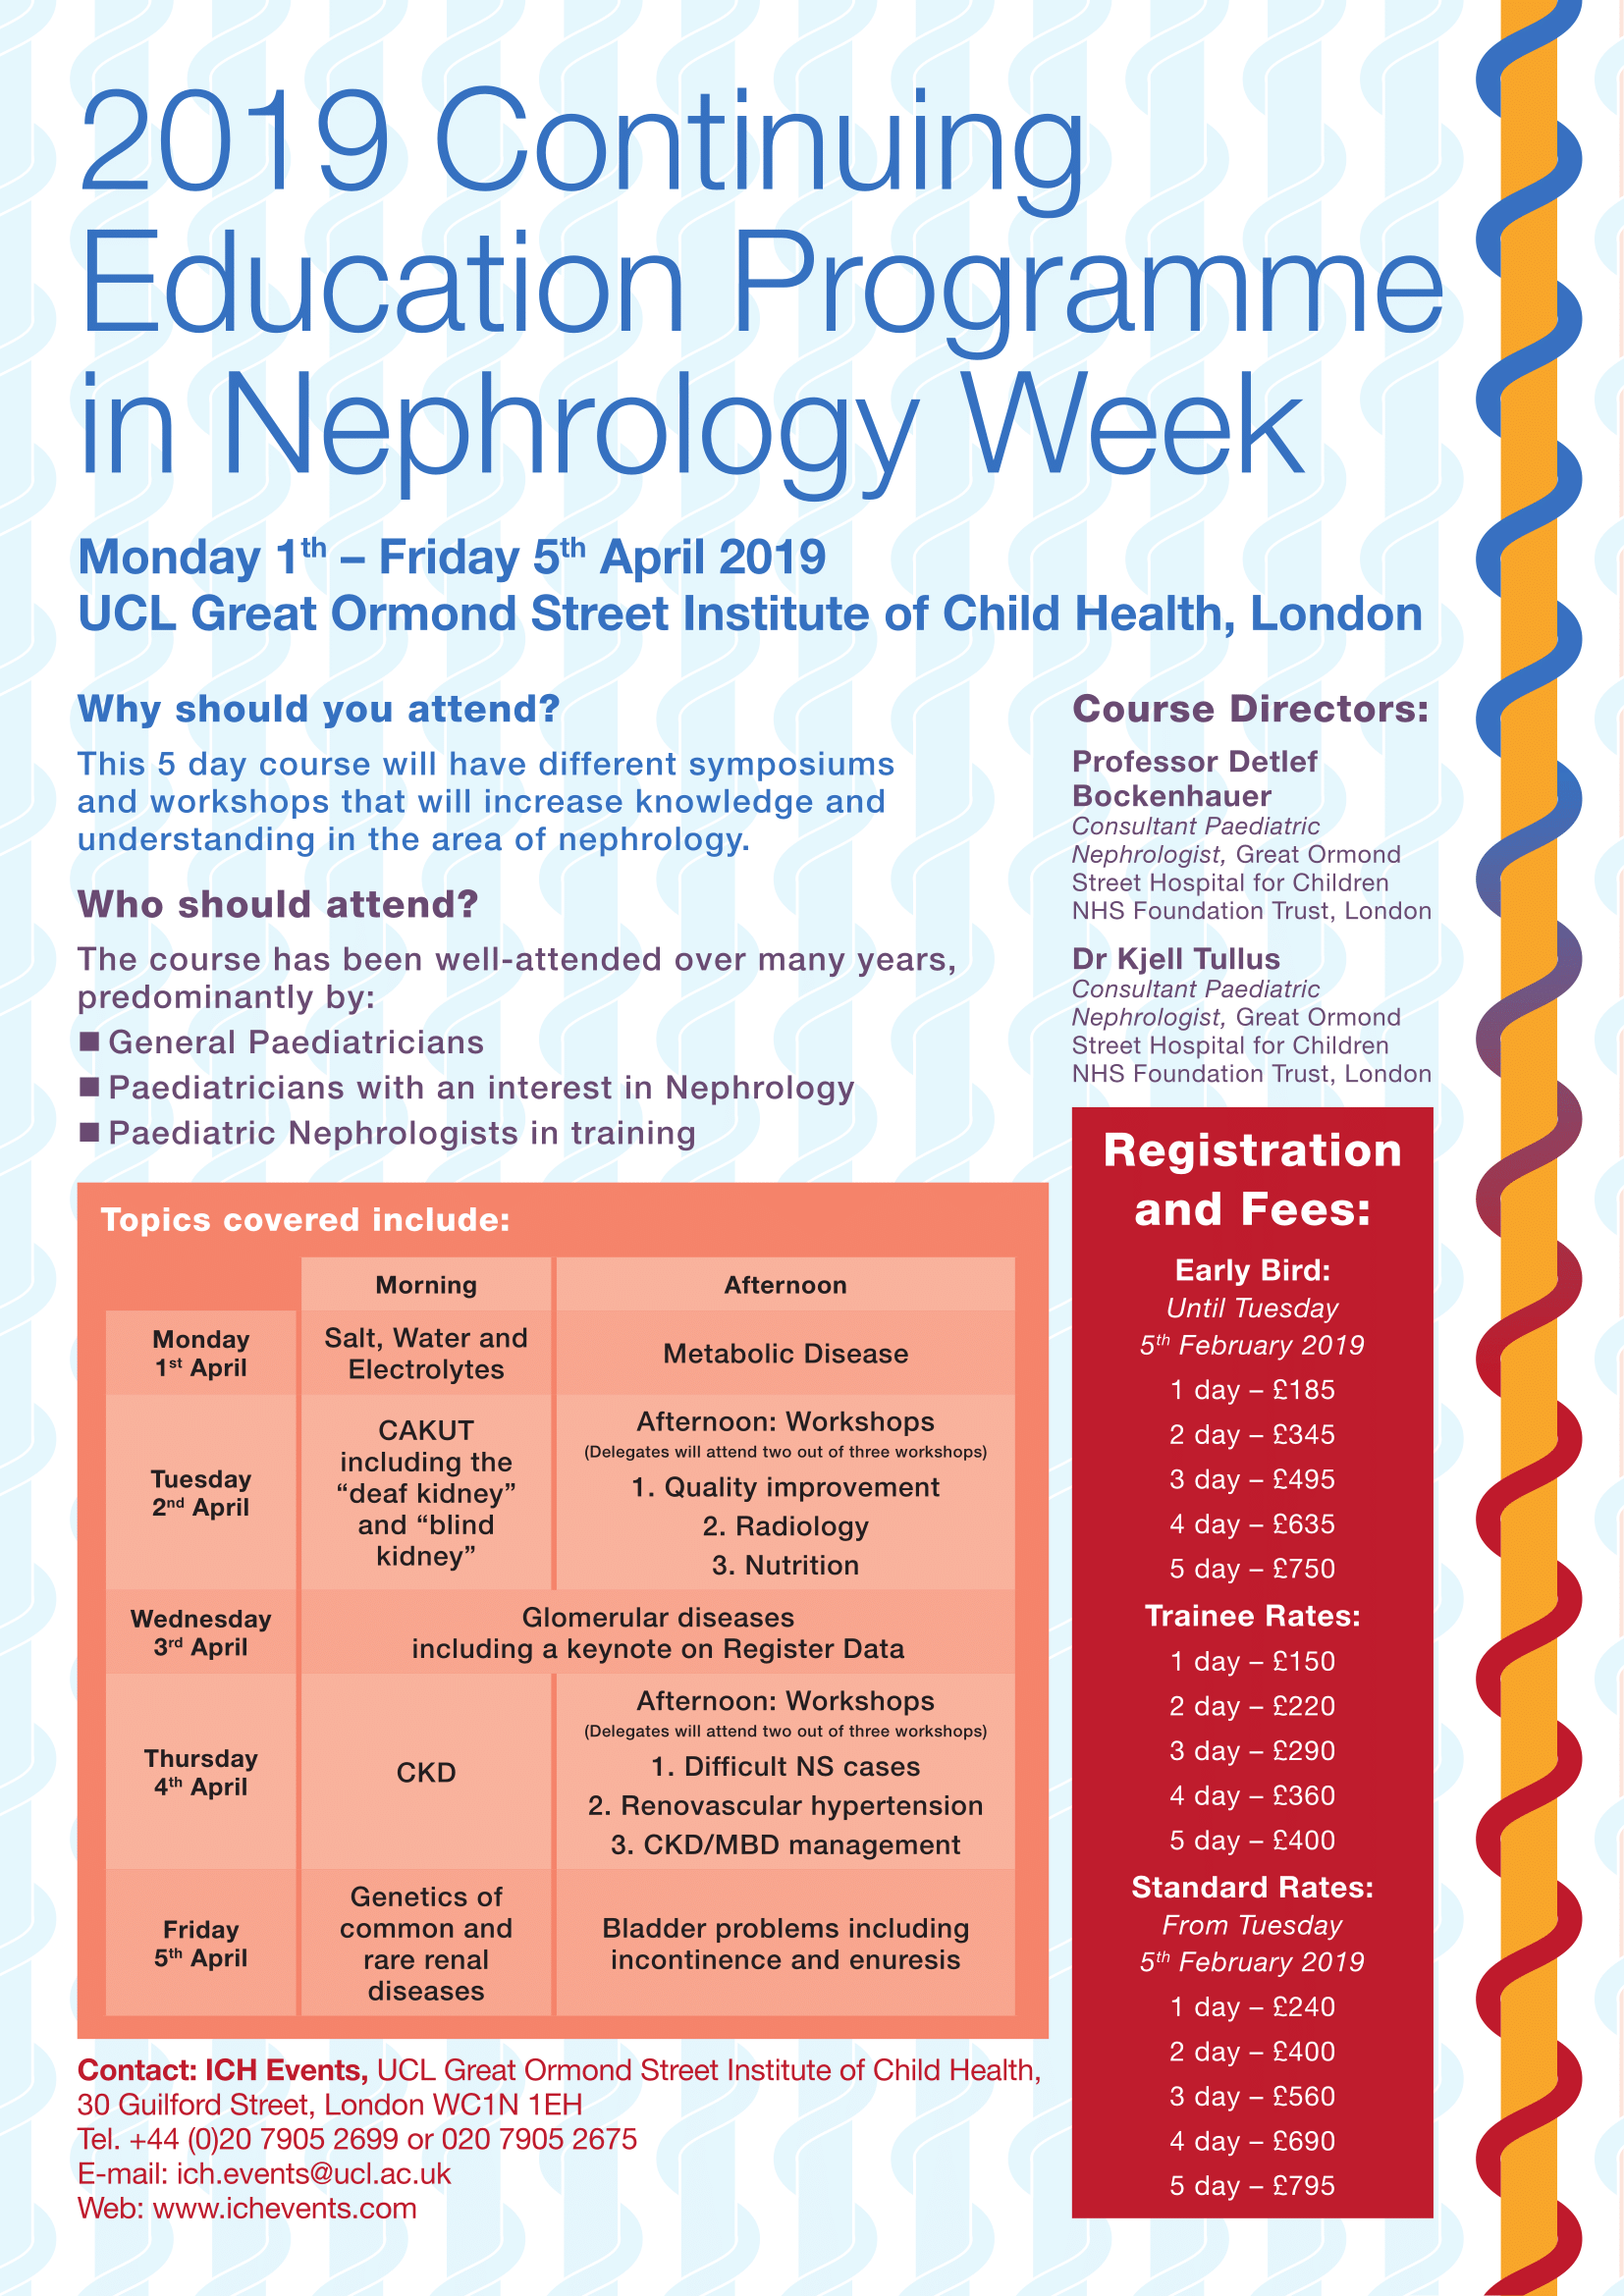 UCL Continuing Education Programme in Nephrology Week 2019